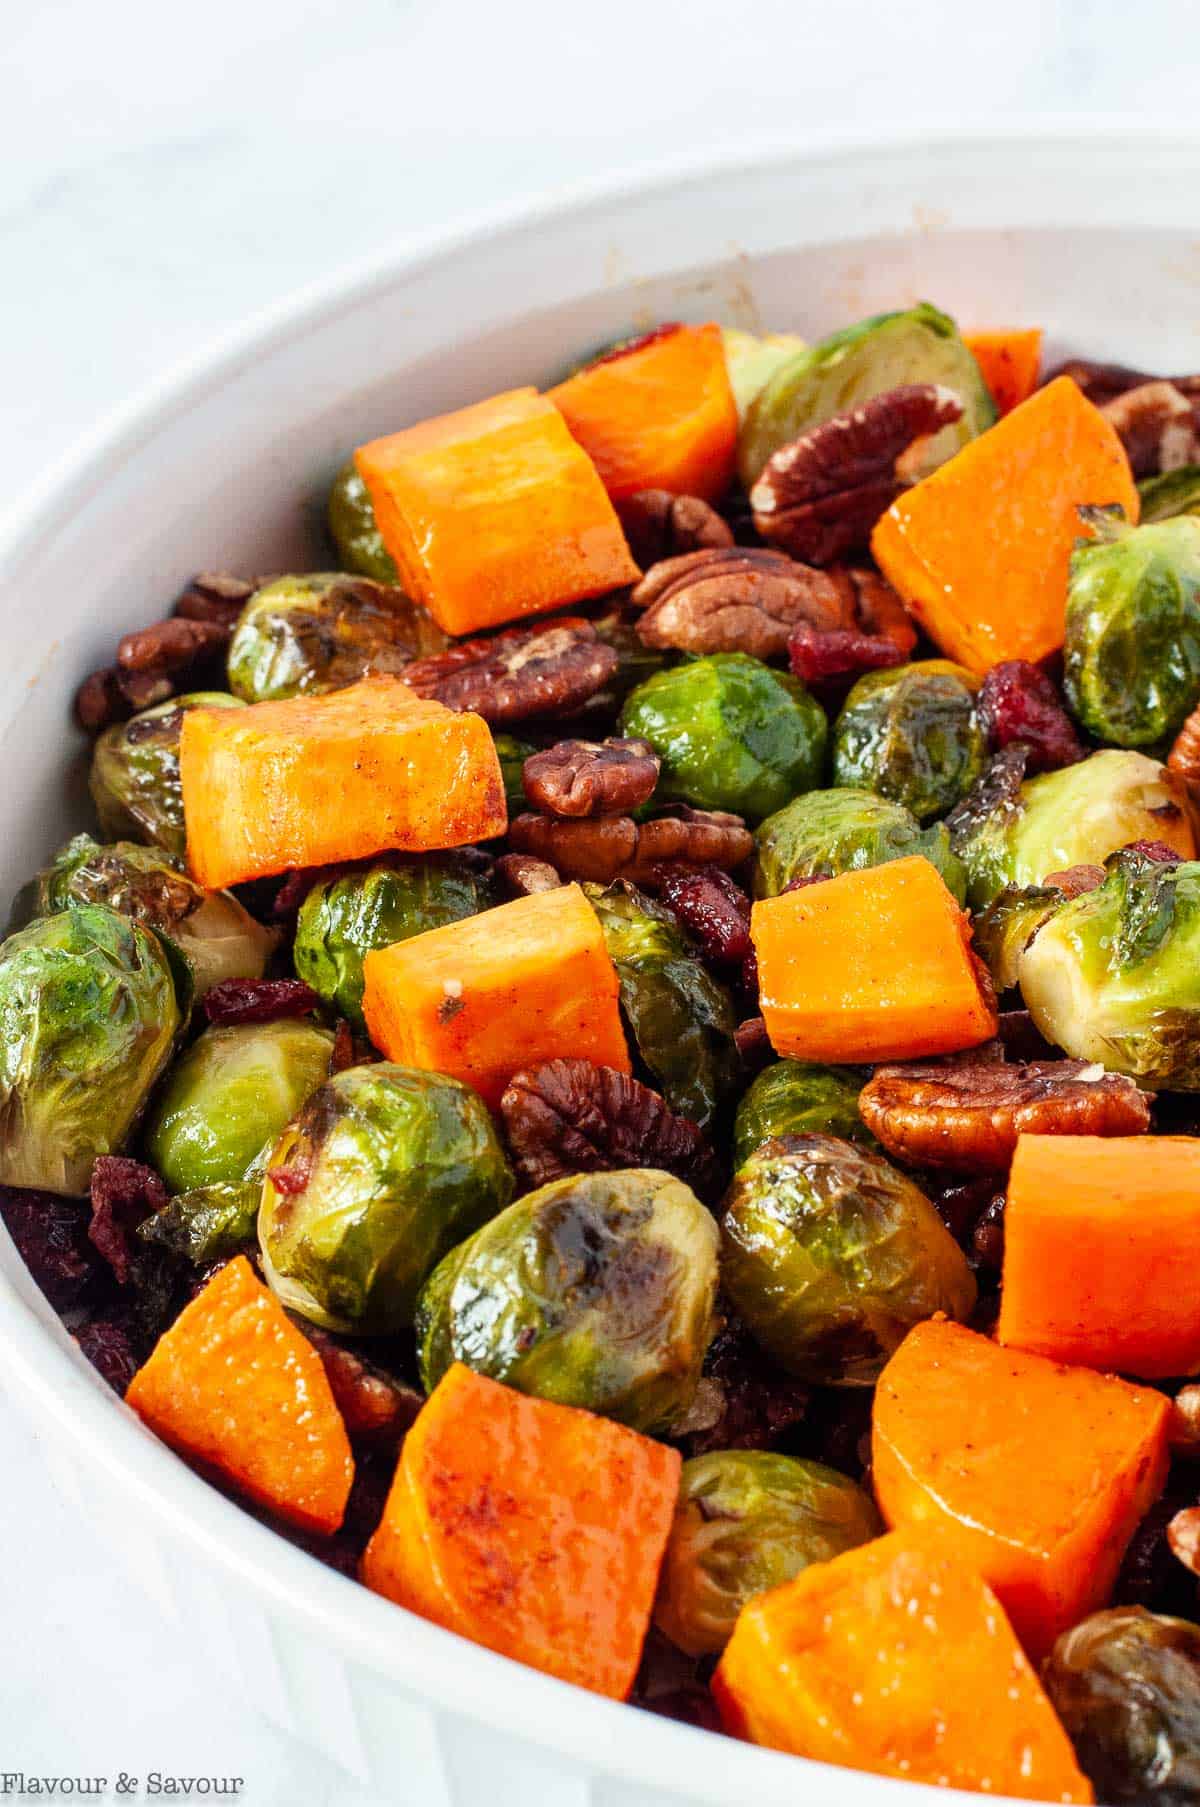 Roasted Brussels Sprouts and sweet potatoes in a bowl.